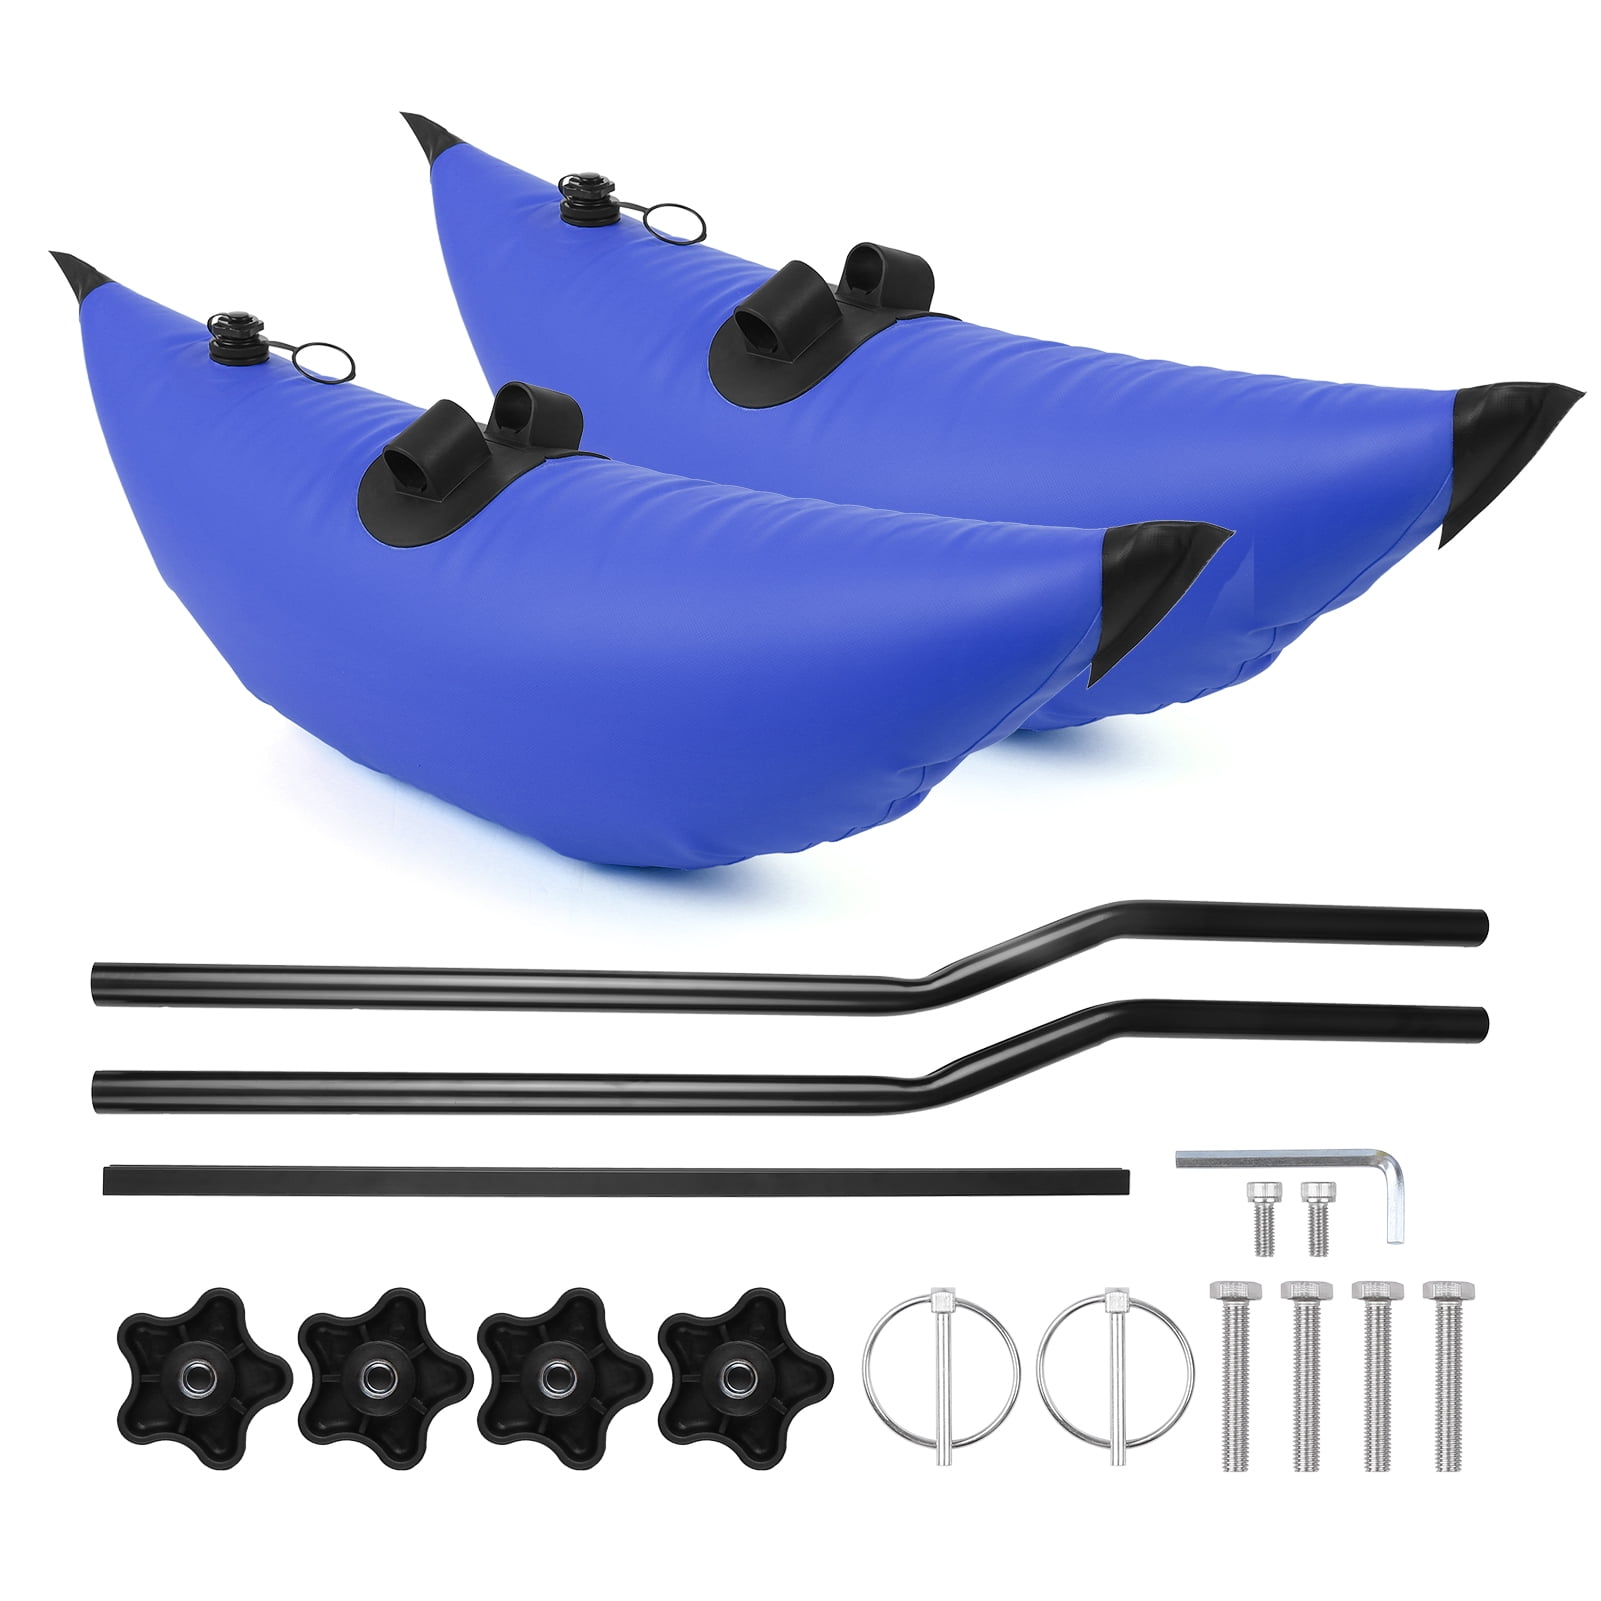 Inflatable PVC Kayak Stabilizer Float with Support Arms Rod Foot Float Stabilizer System Kit for Kayak Boat Fishing 